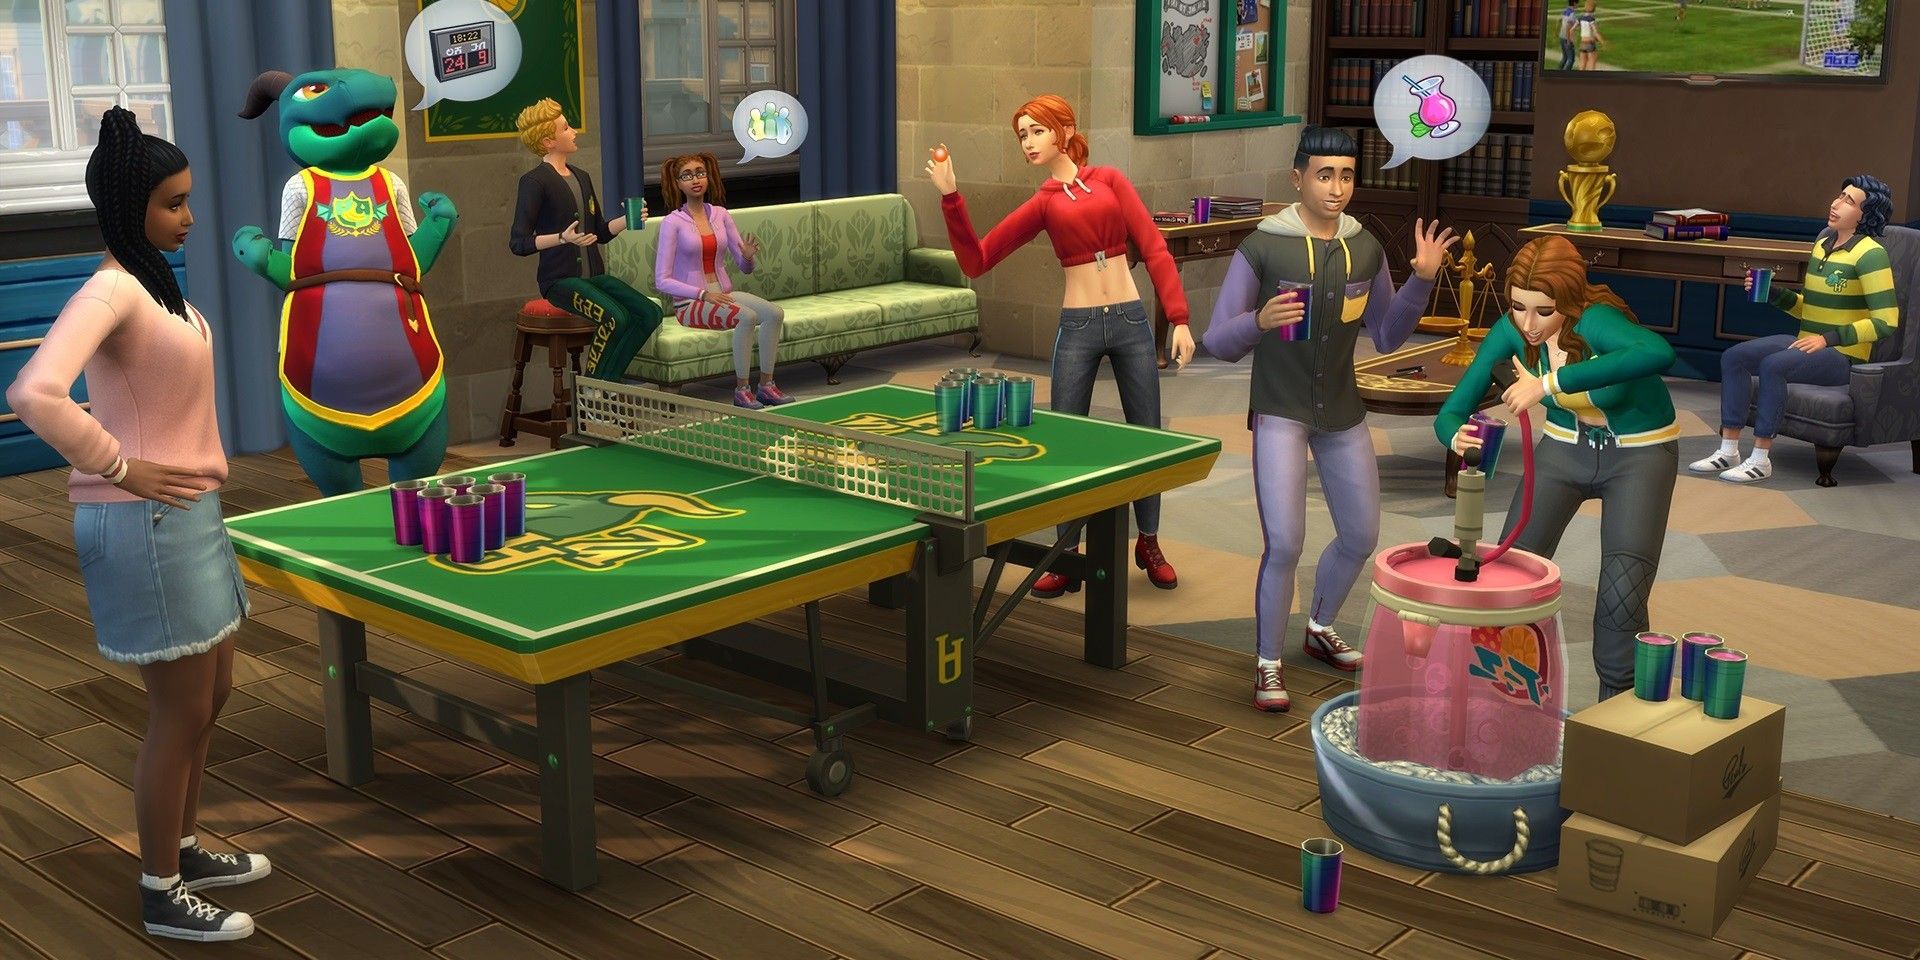 The Sims 4's Discover University Expansion Pack is heavily inspired by American colleges.